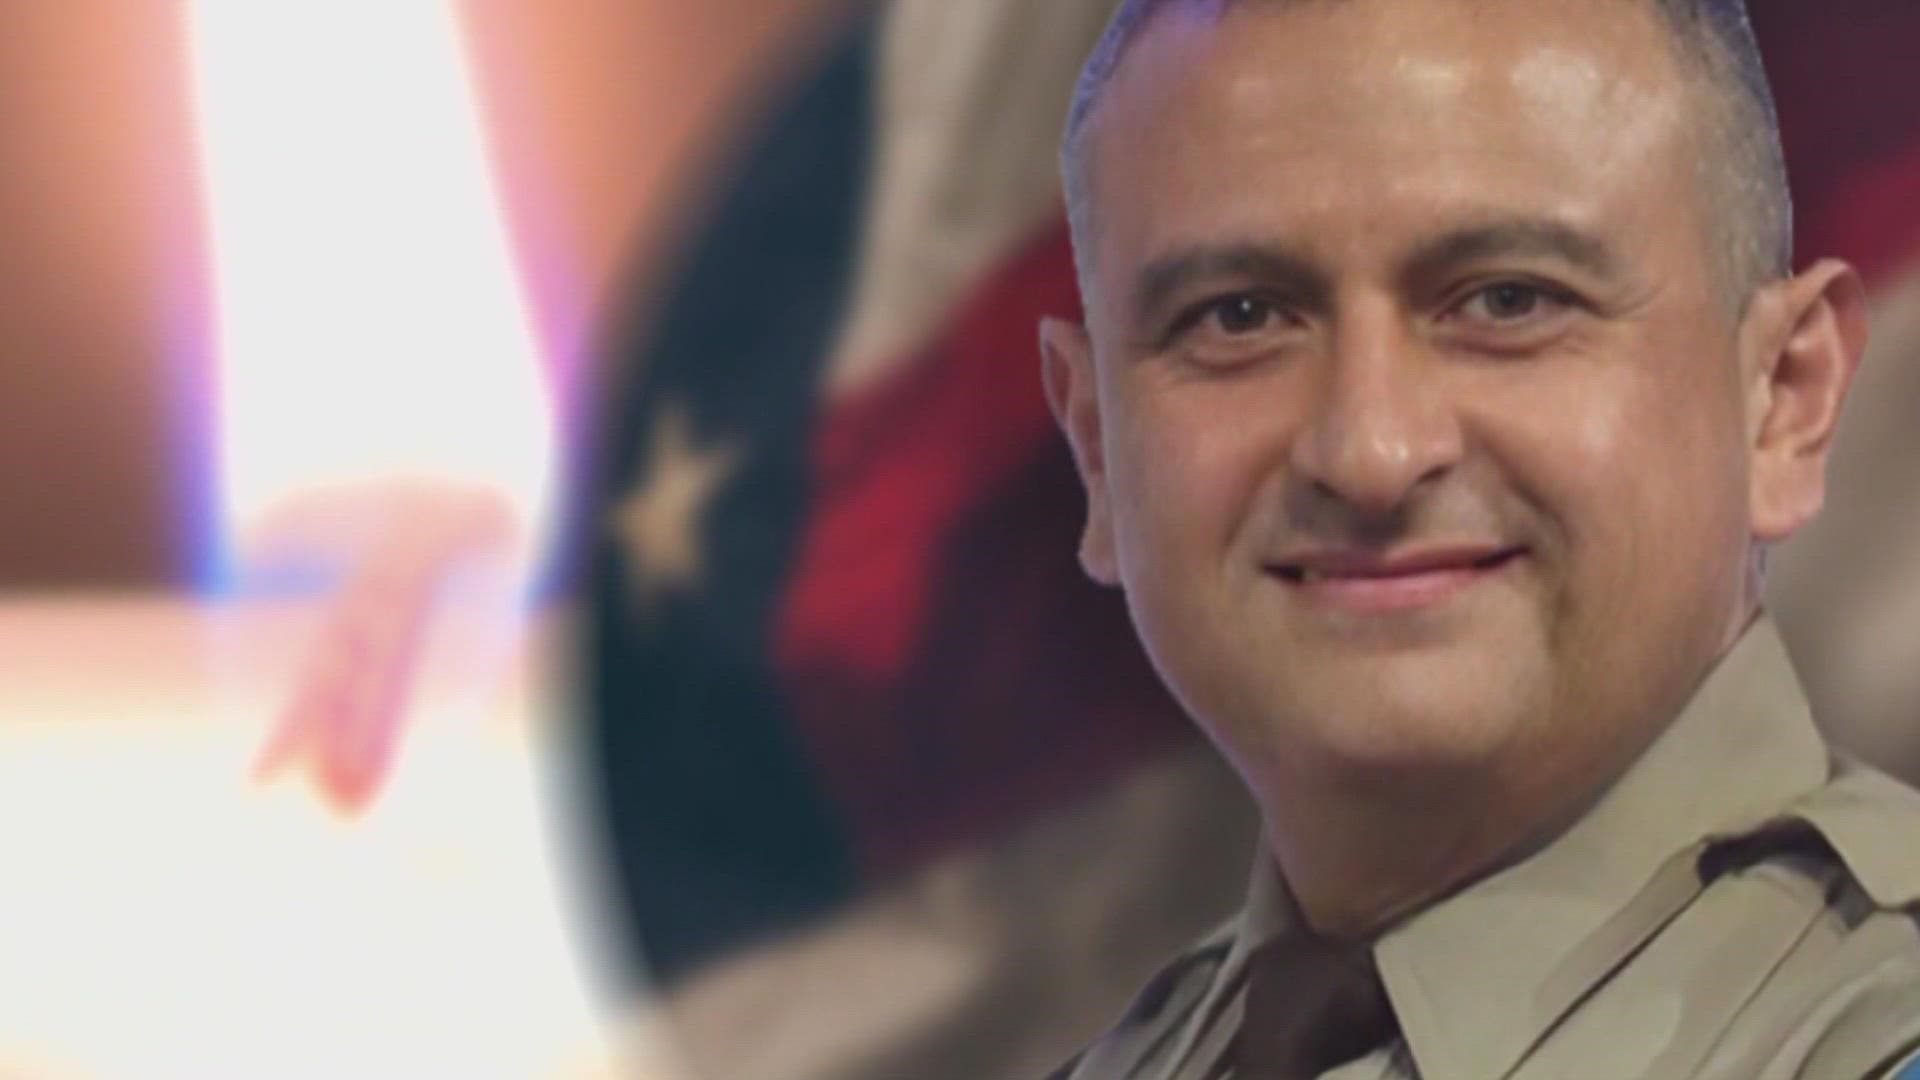 The community honors the Maricopa County Sheriff’s deputy who was killed in the line of duty last year.